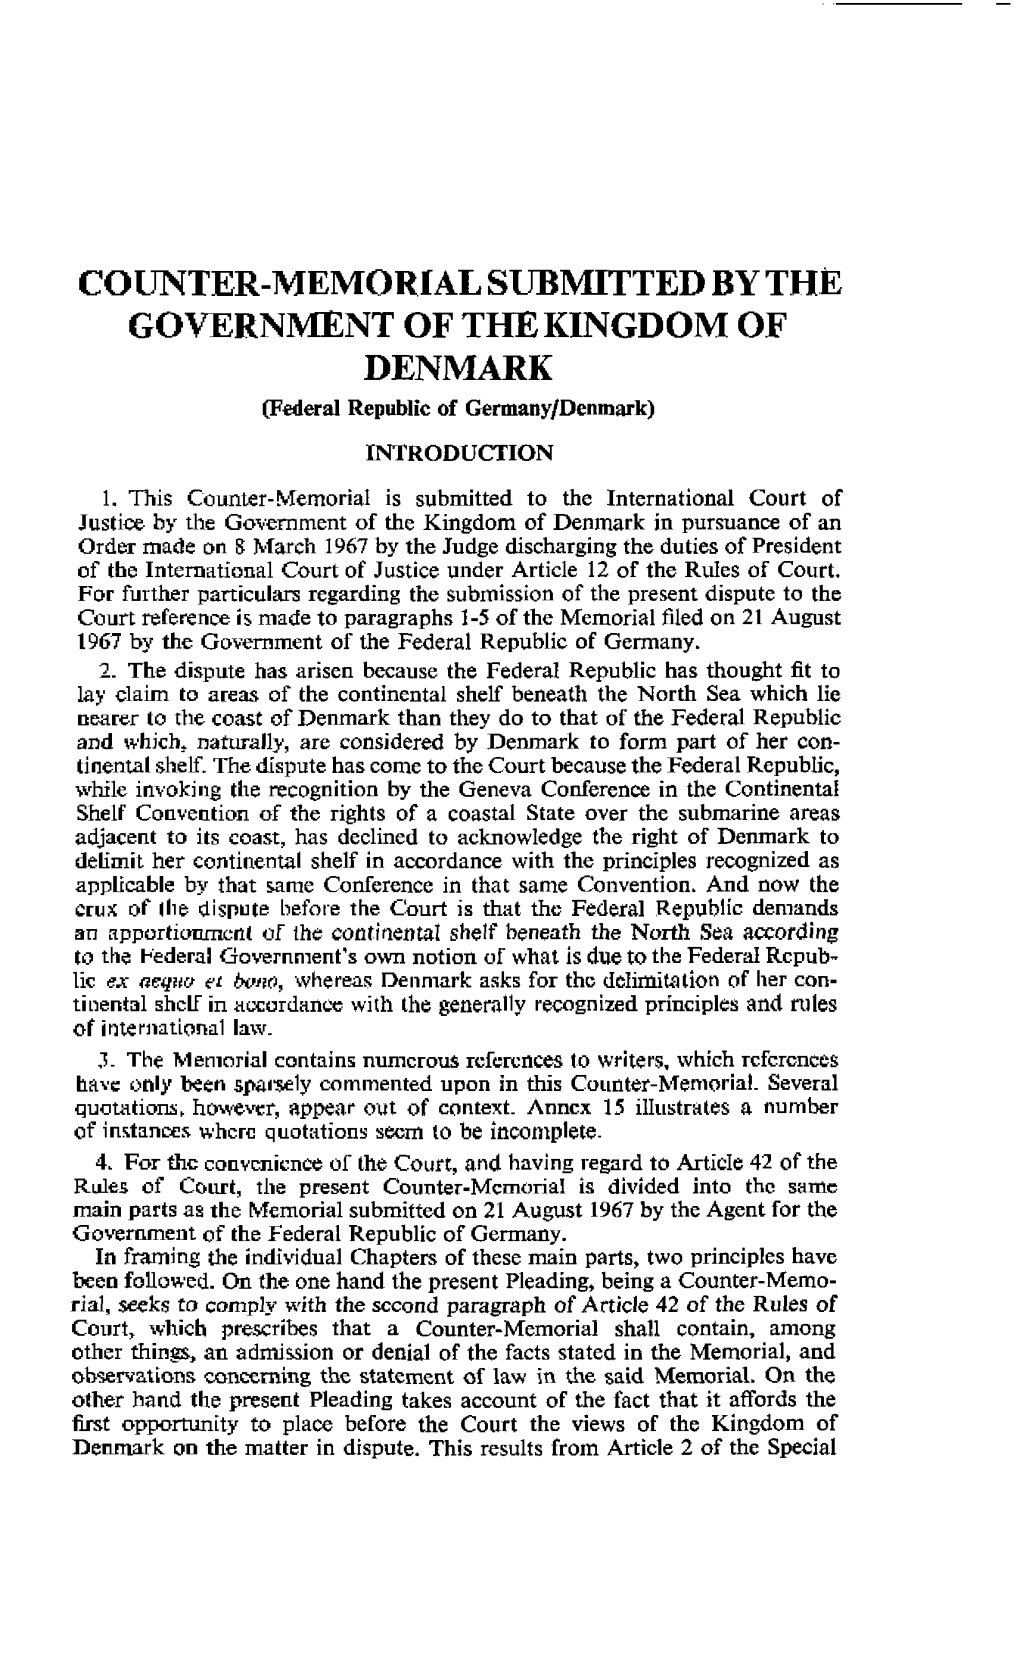 COUNTER-Memorlal SUBMITTED by TH.E Governmnt of the KINGDOM of DENMARK Vederal Republic of Germany/Denmark) INTRODUCTION 1